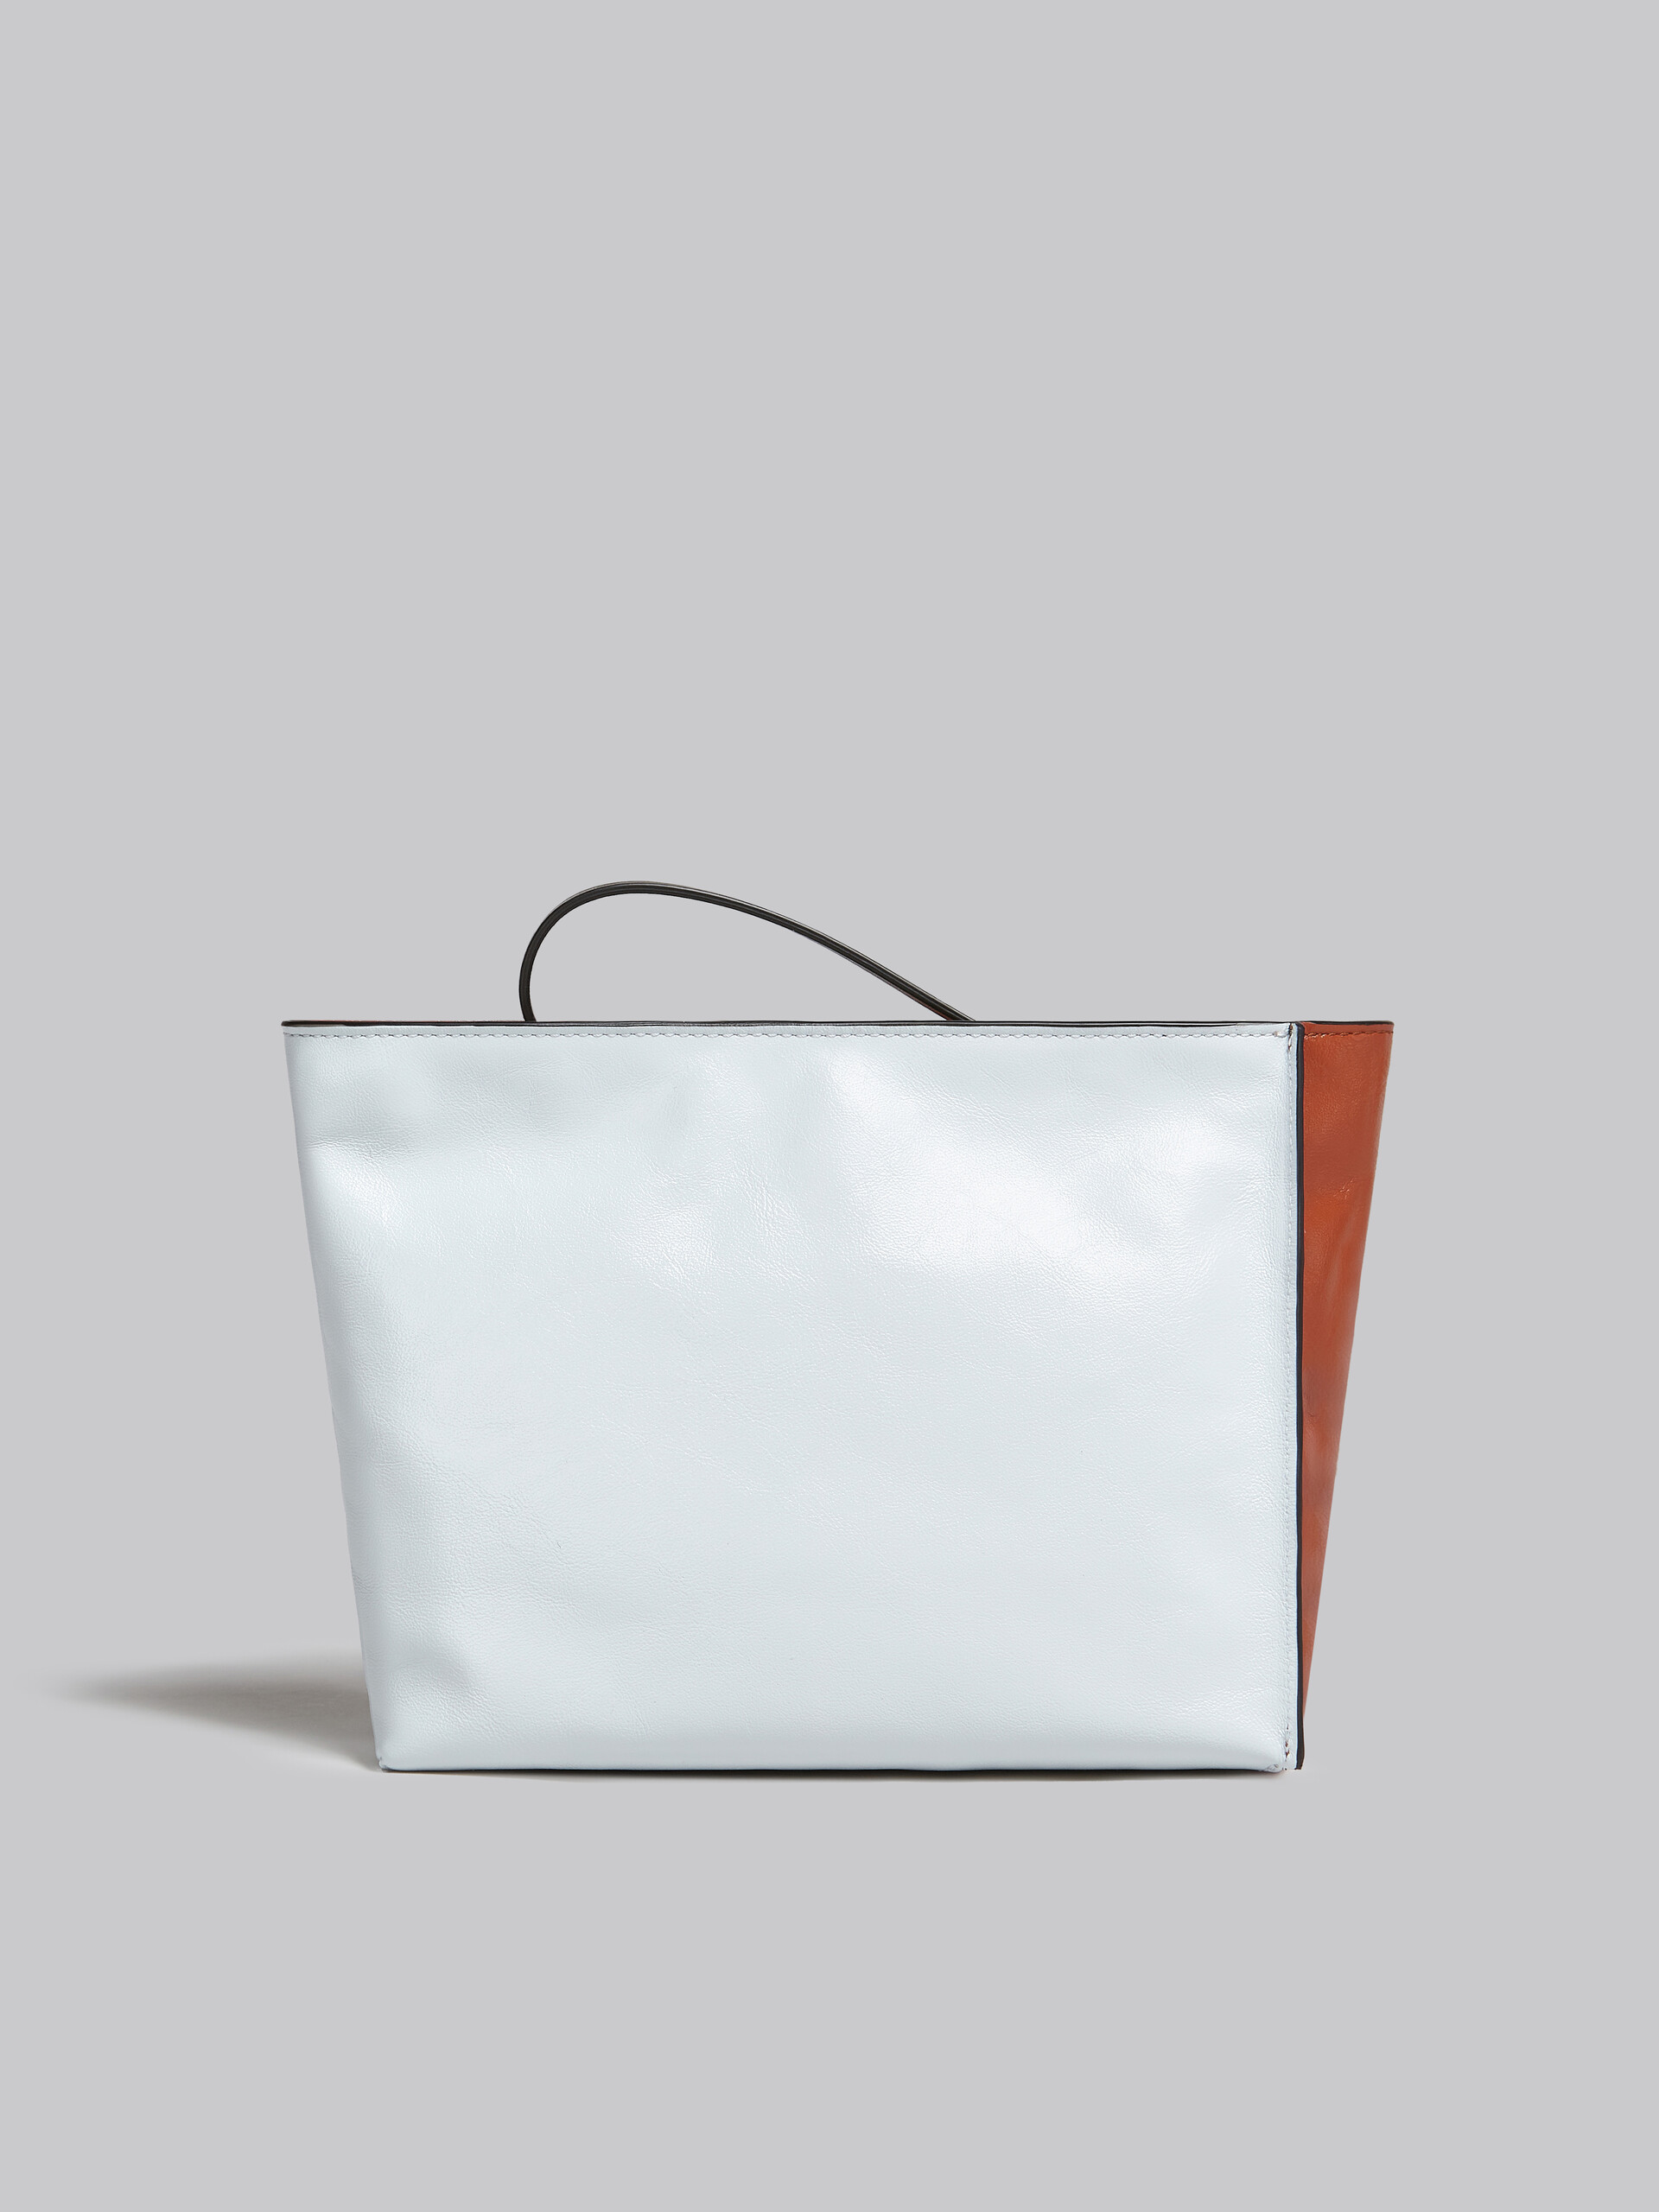 Museo Soft Clutch in brown white and black leather - Pochette - Image 2